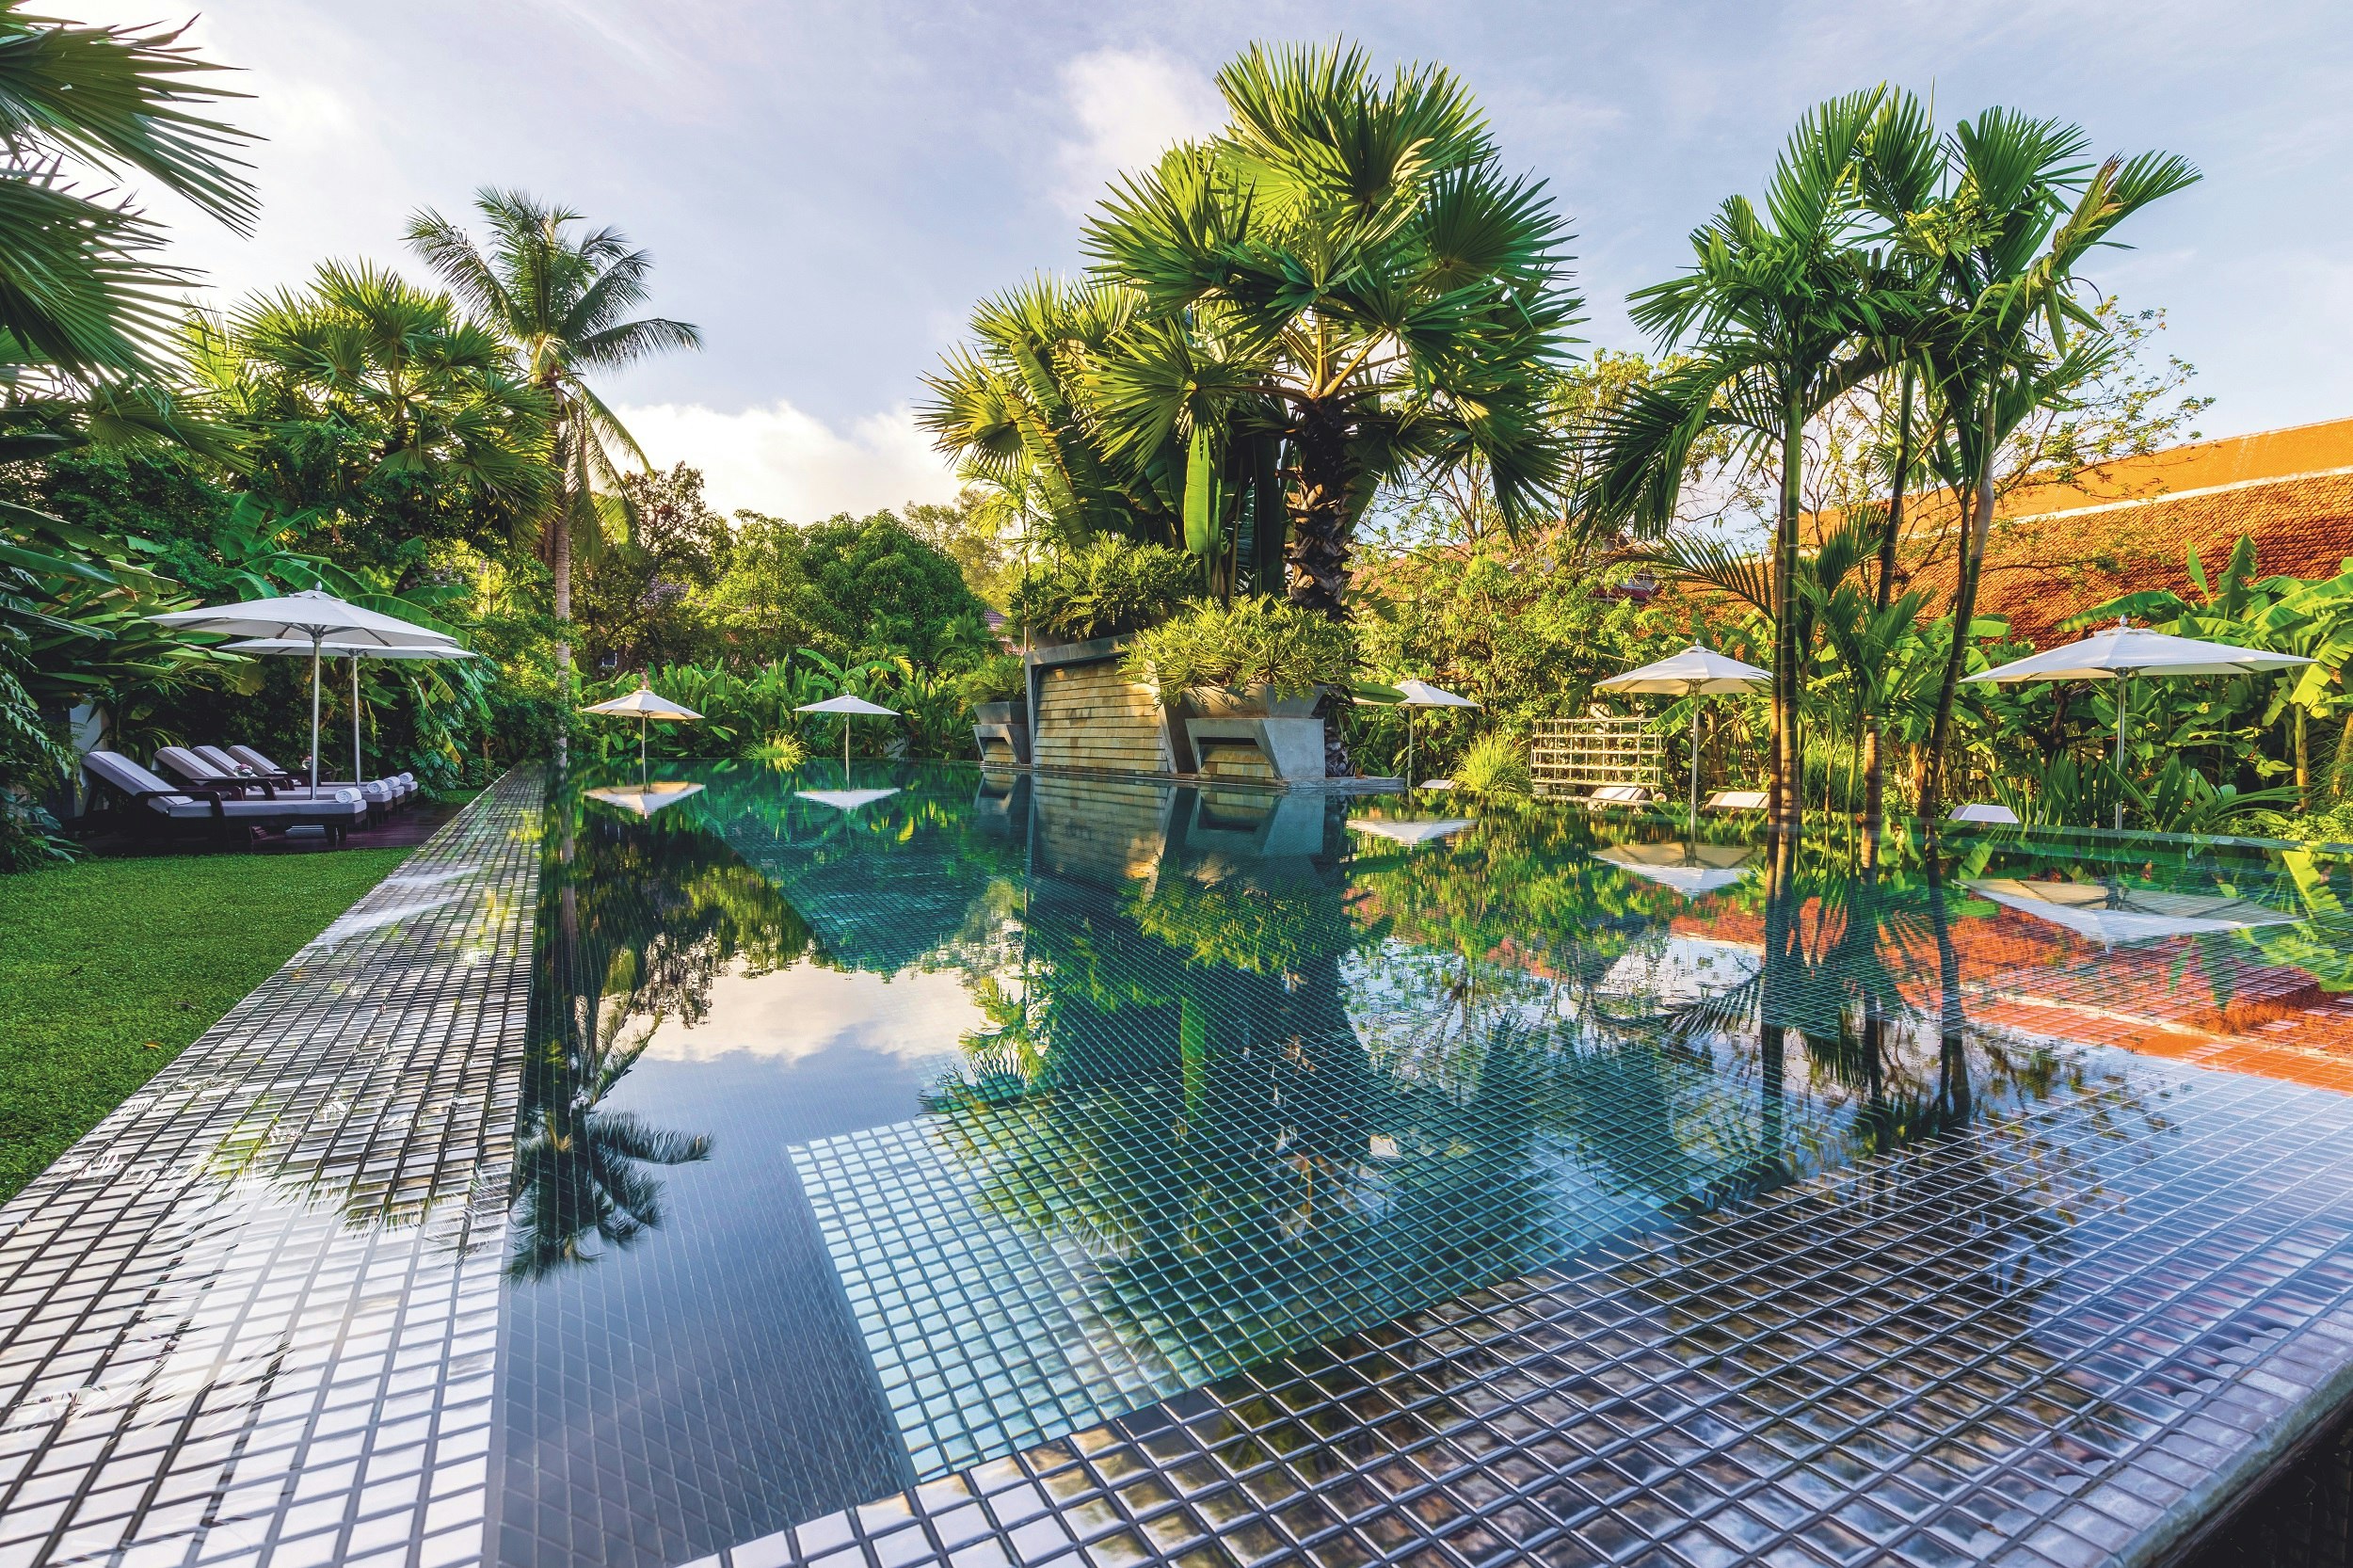 A swimming pool set in a green garden lined with palm trees